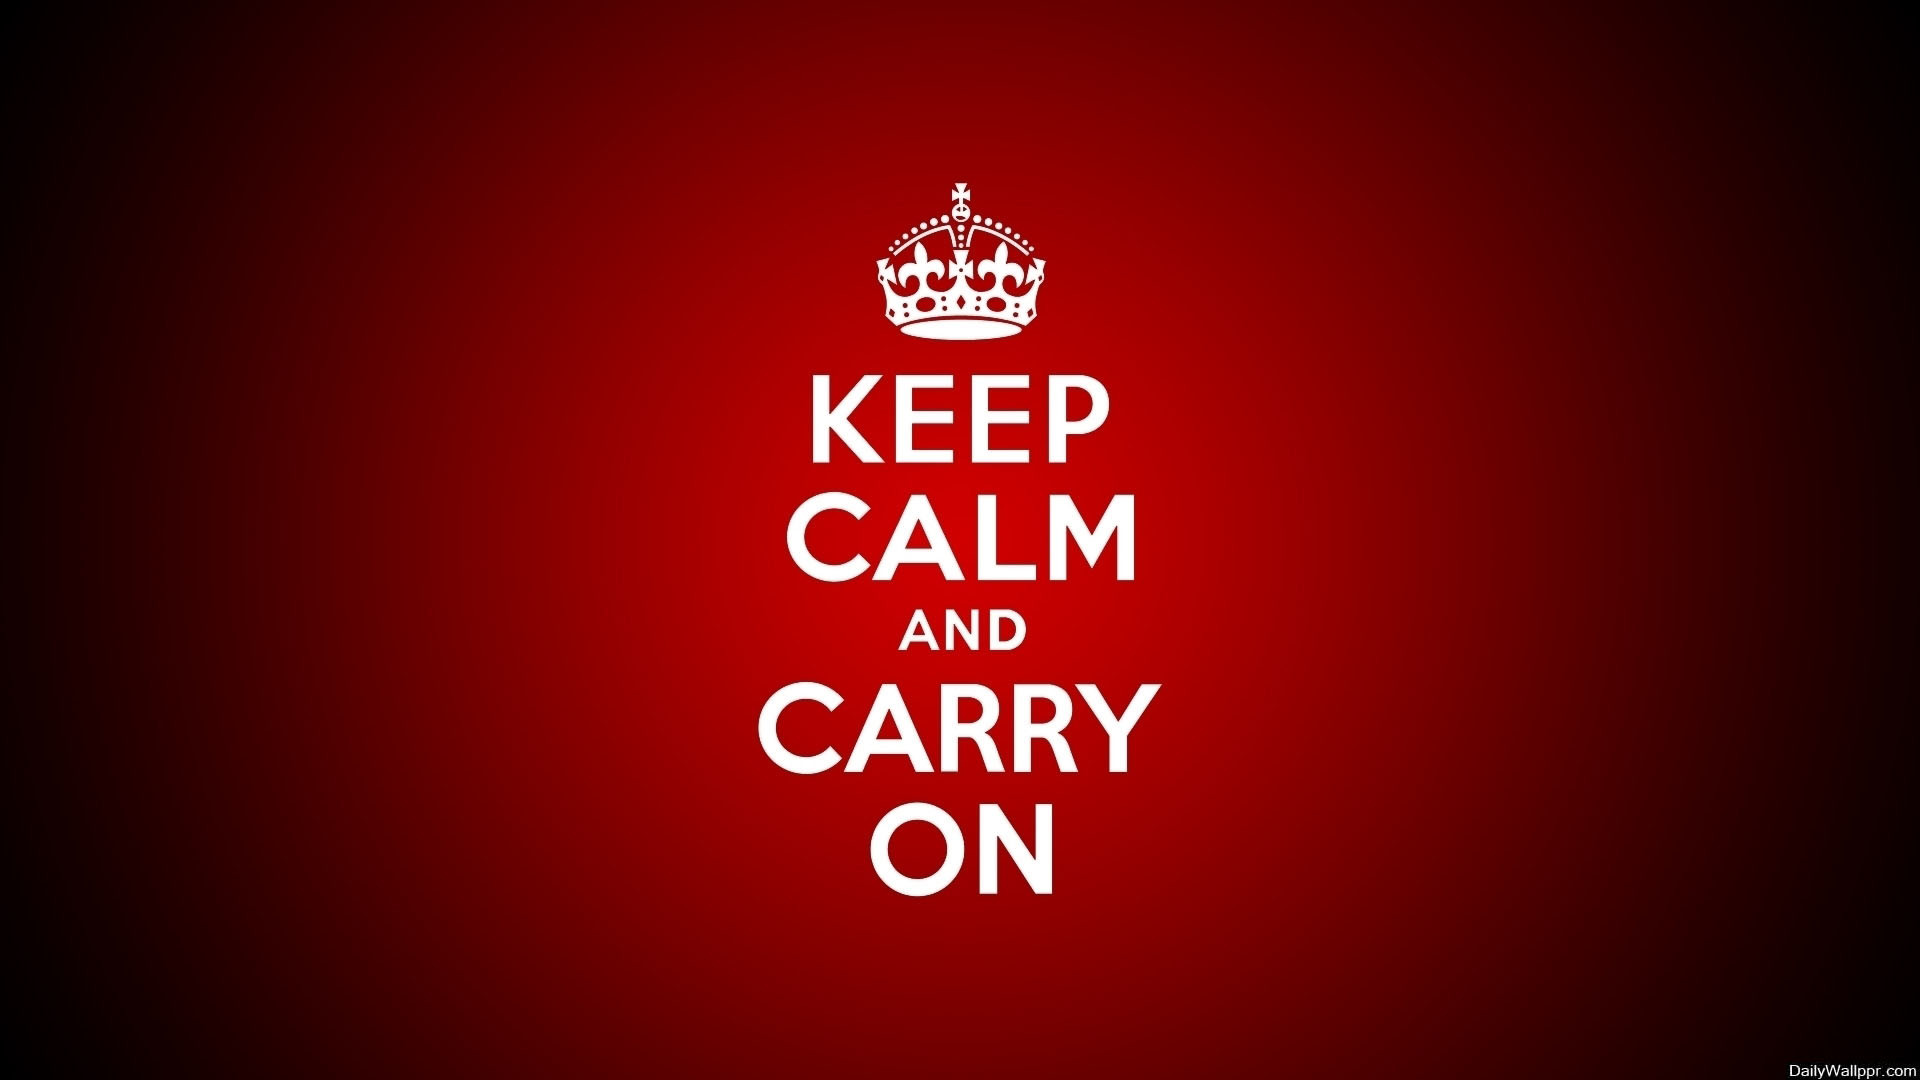 1920x1080 Keep Calm and Carry On